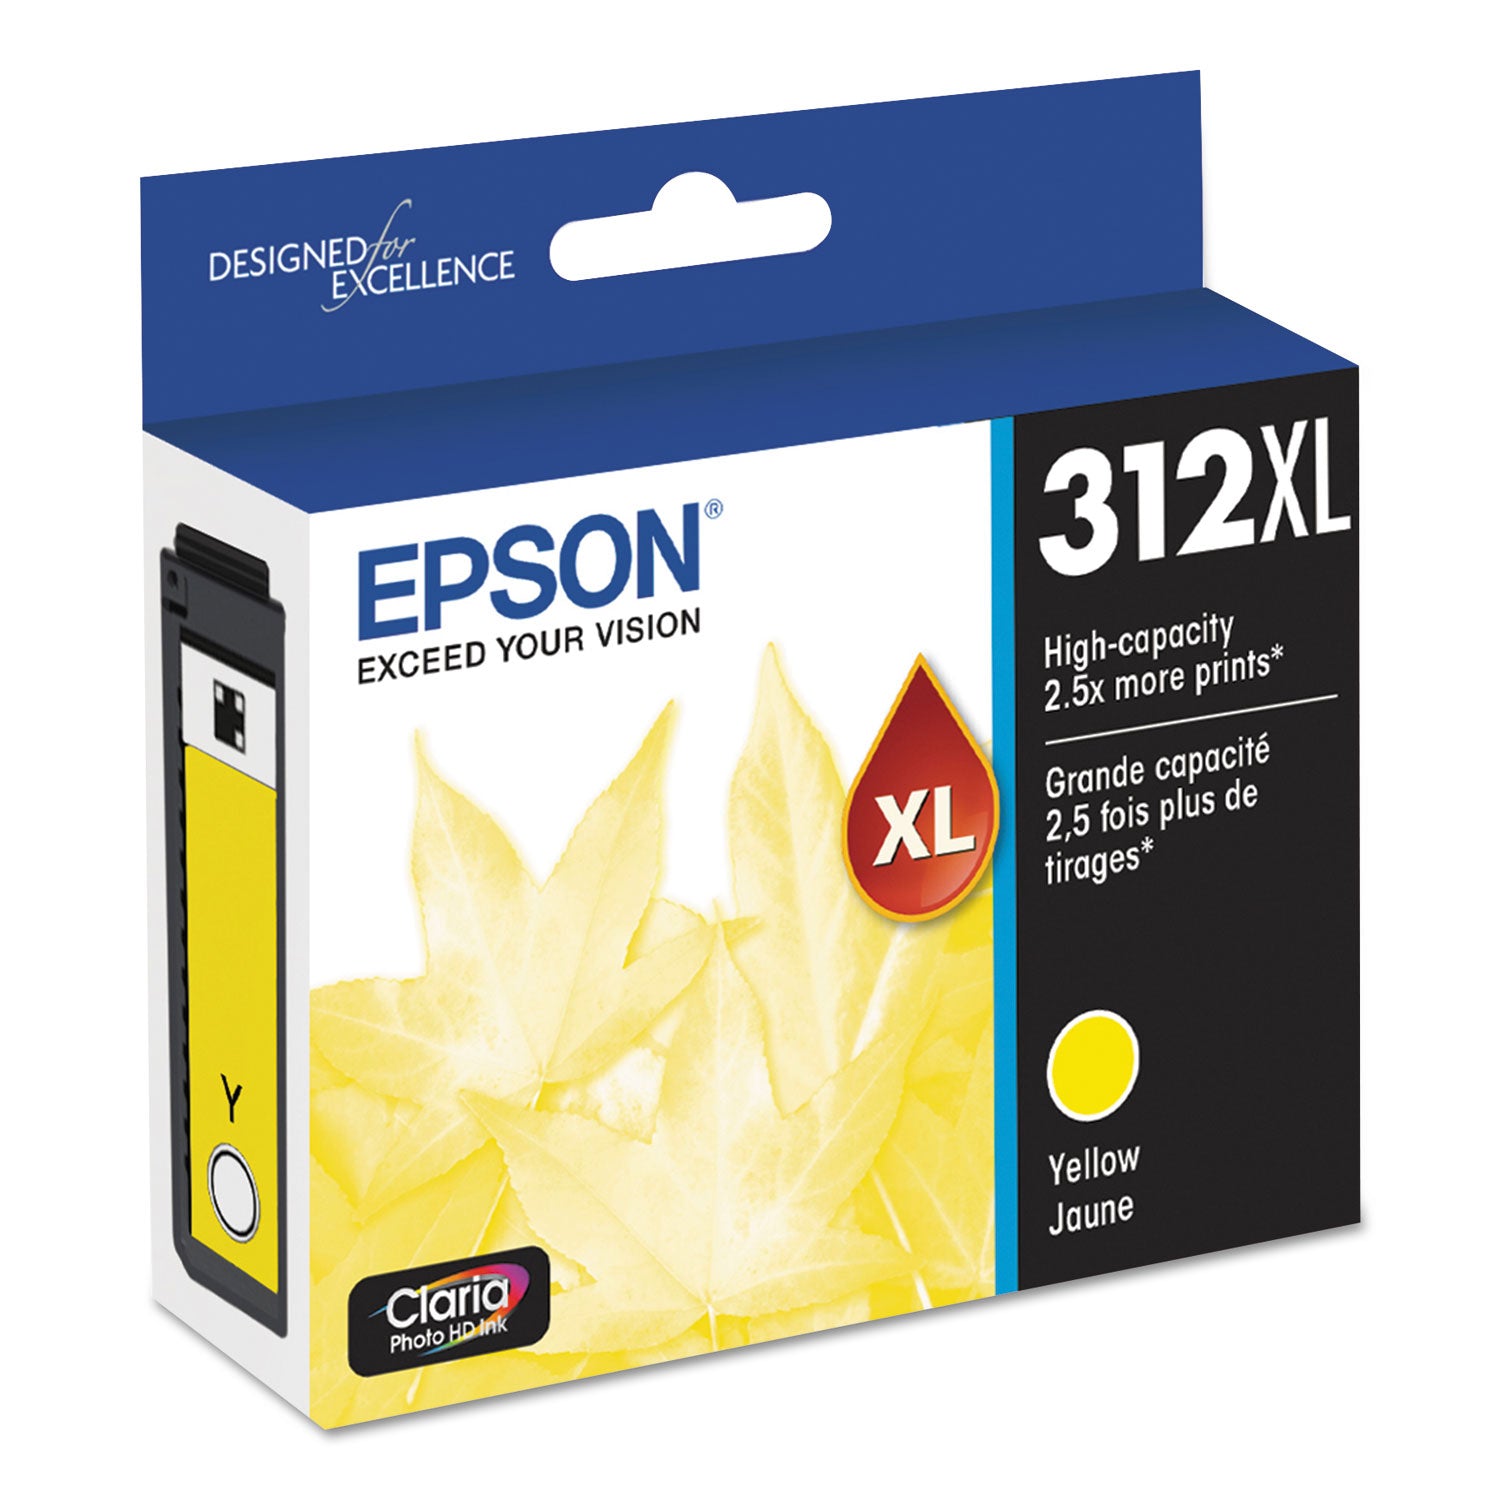 t312xl420-s-312xl-claria-high-yield-ink-830-page-yield-yellow_epst312xl420s - 2